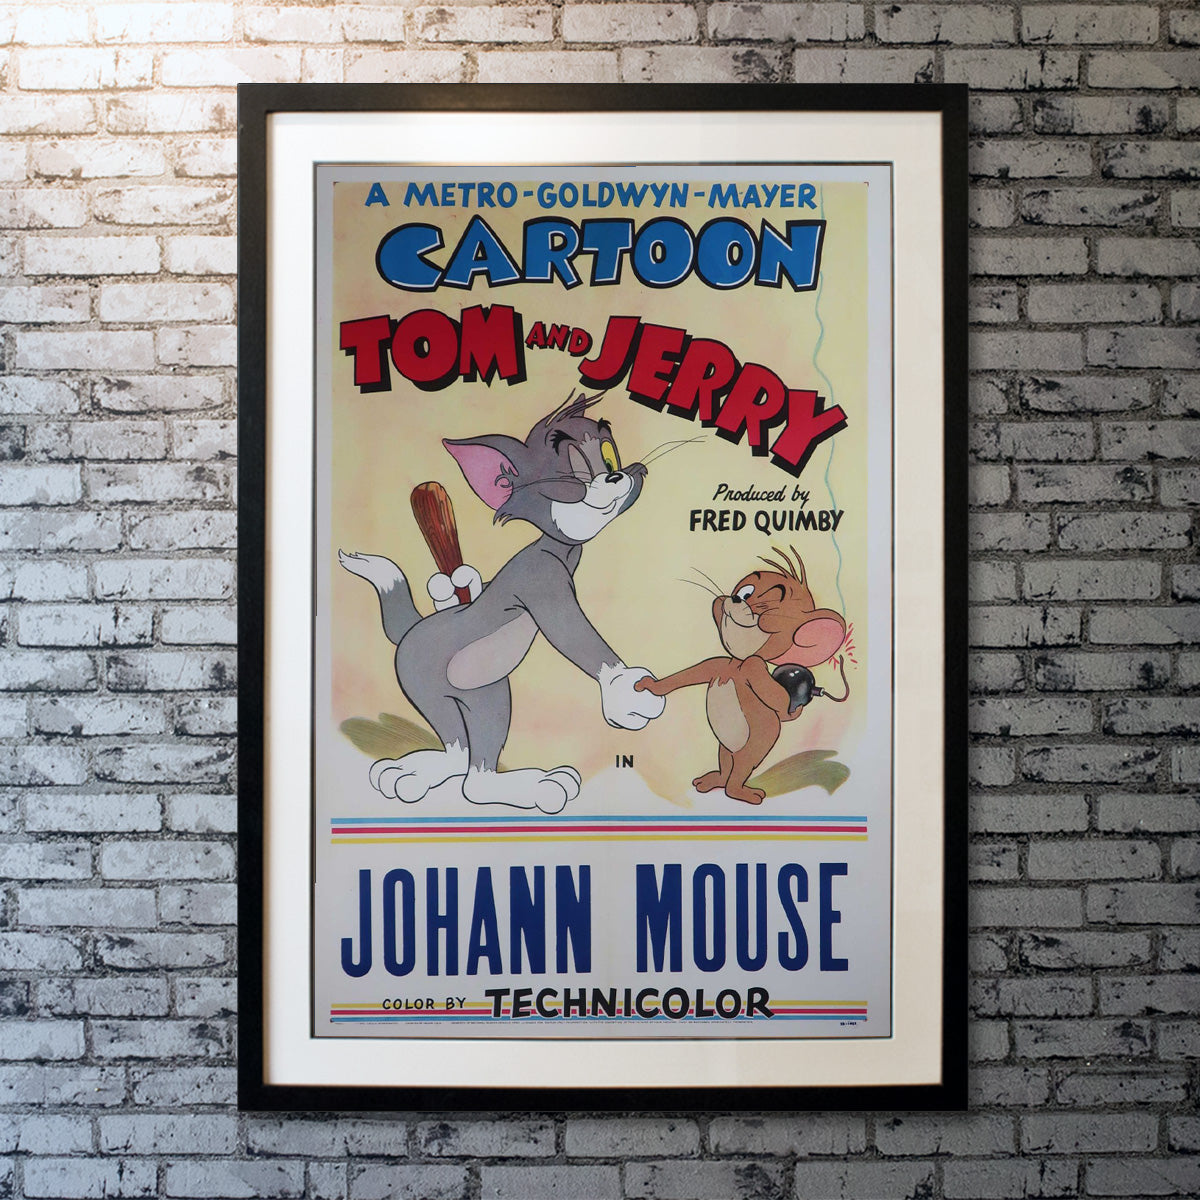 Tom And Jerry In Johann Mouse (1953)